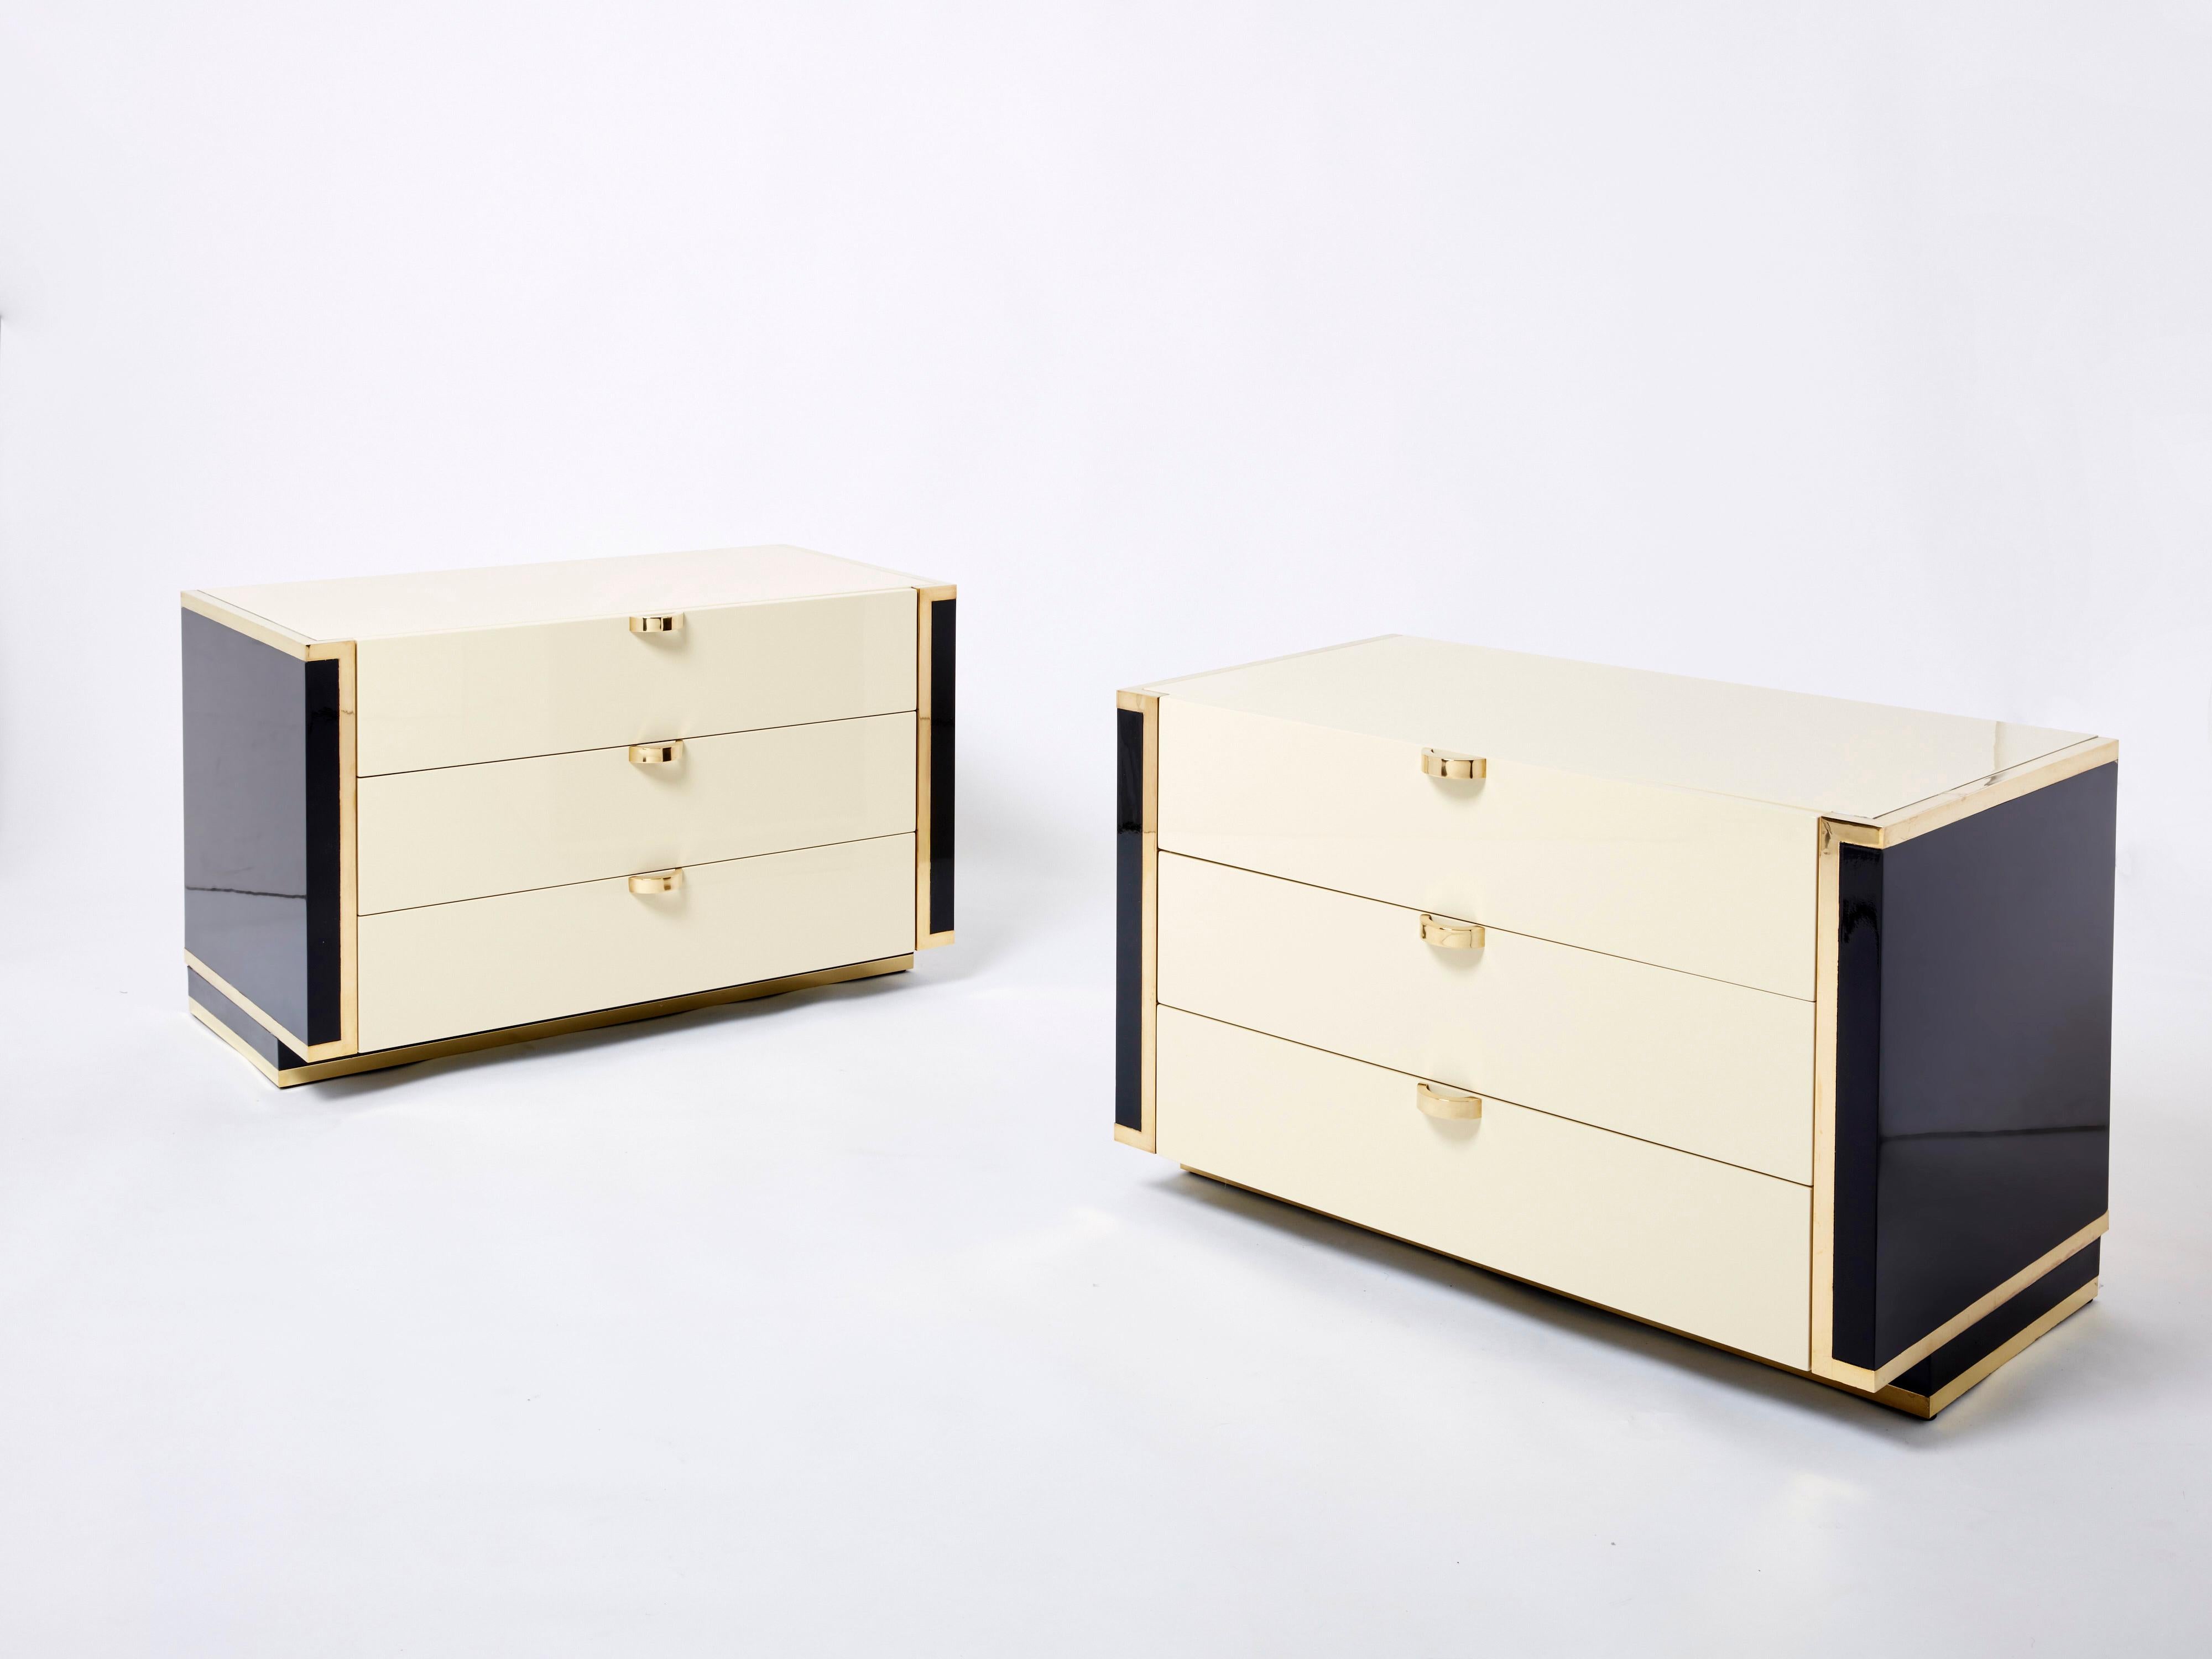 These twin small chest of drawers in a beautiful cream and black lacquer could serve spacious nightstands in a bedroom, sturdy end tables in a living room or office, or as small commodes in a bedroom dressing room. The crisp mix of light cream and